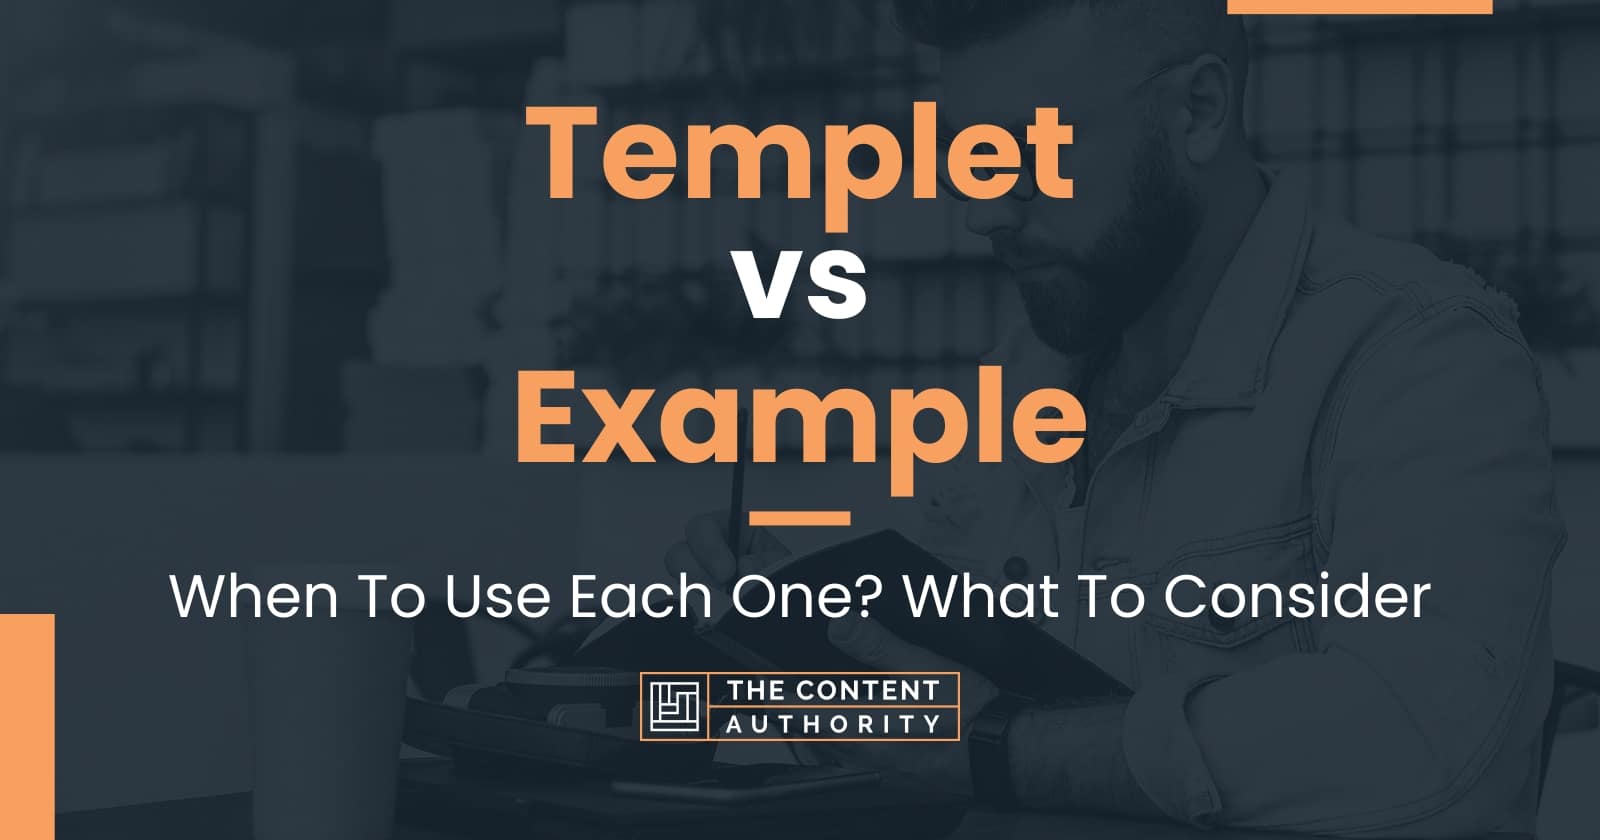 templet-vs-example-when-to-use-each-one-what-to-consider